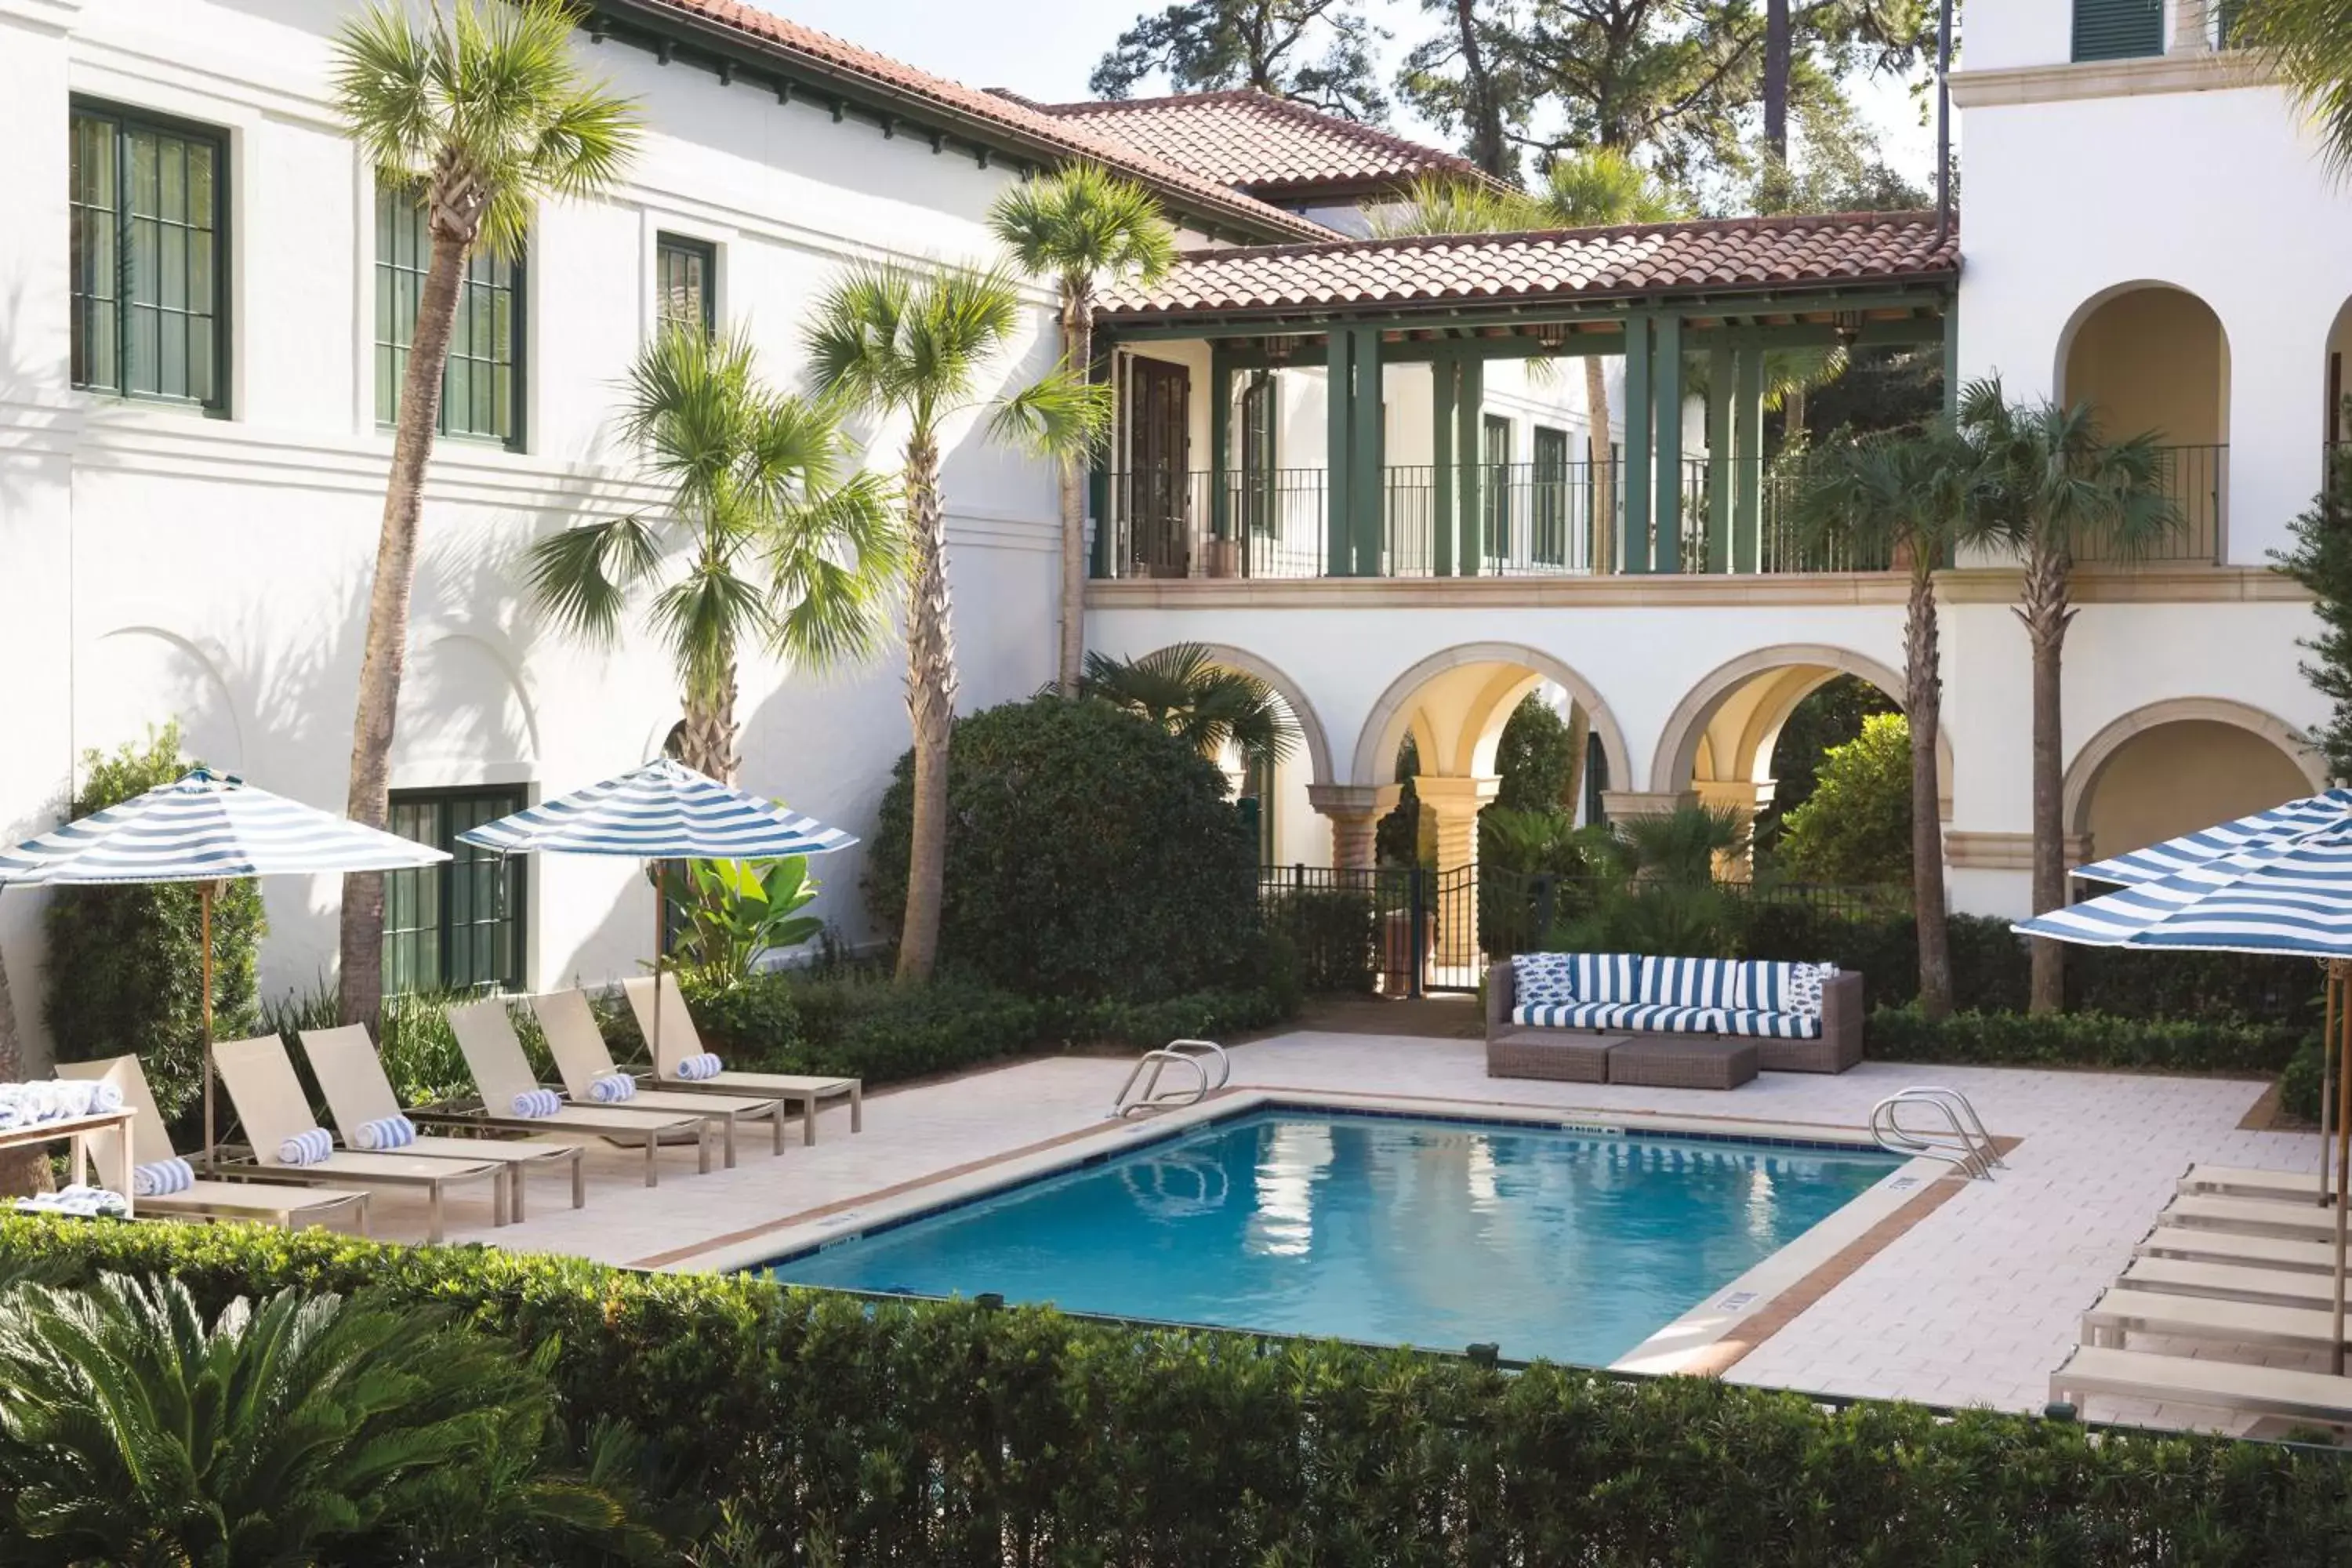 Property building, Swimming Pool in The Inn by Sea Island